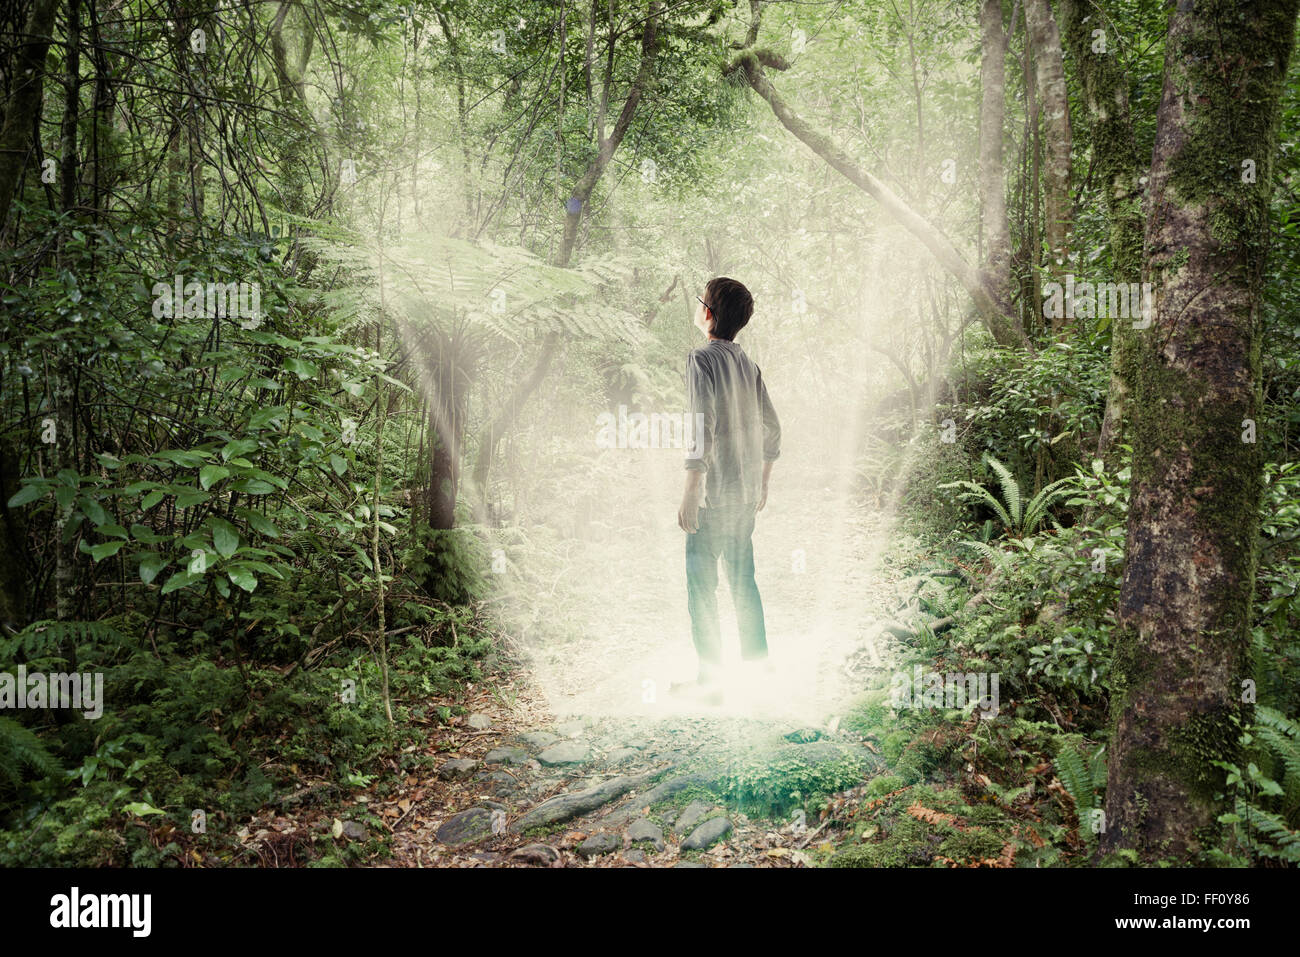 Mixed race boy standing in forest portal Stock Photo